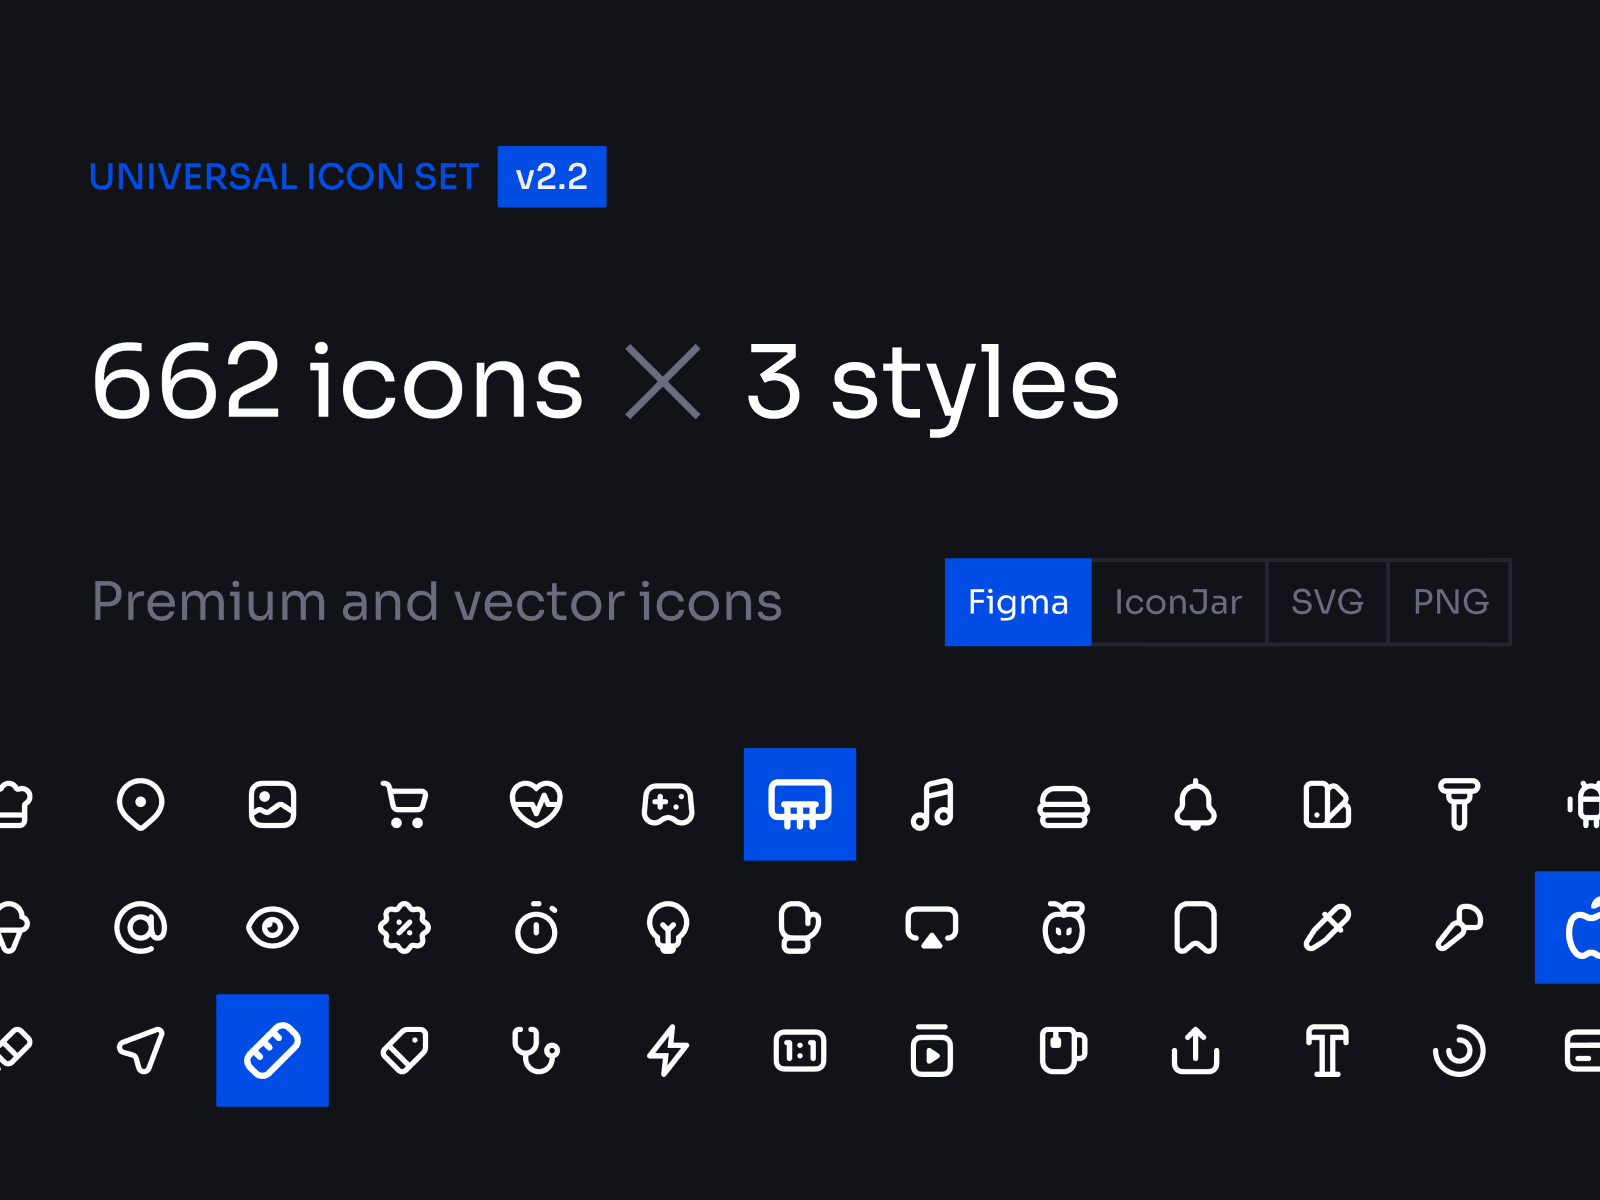 icon-category Vector Icons free download in SVG, PNG Format